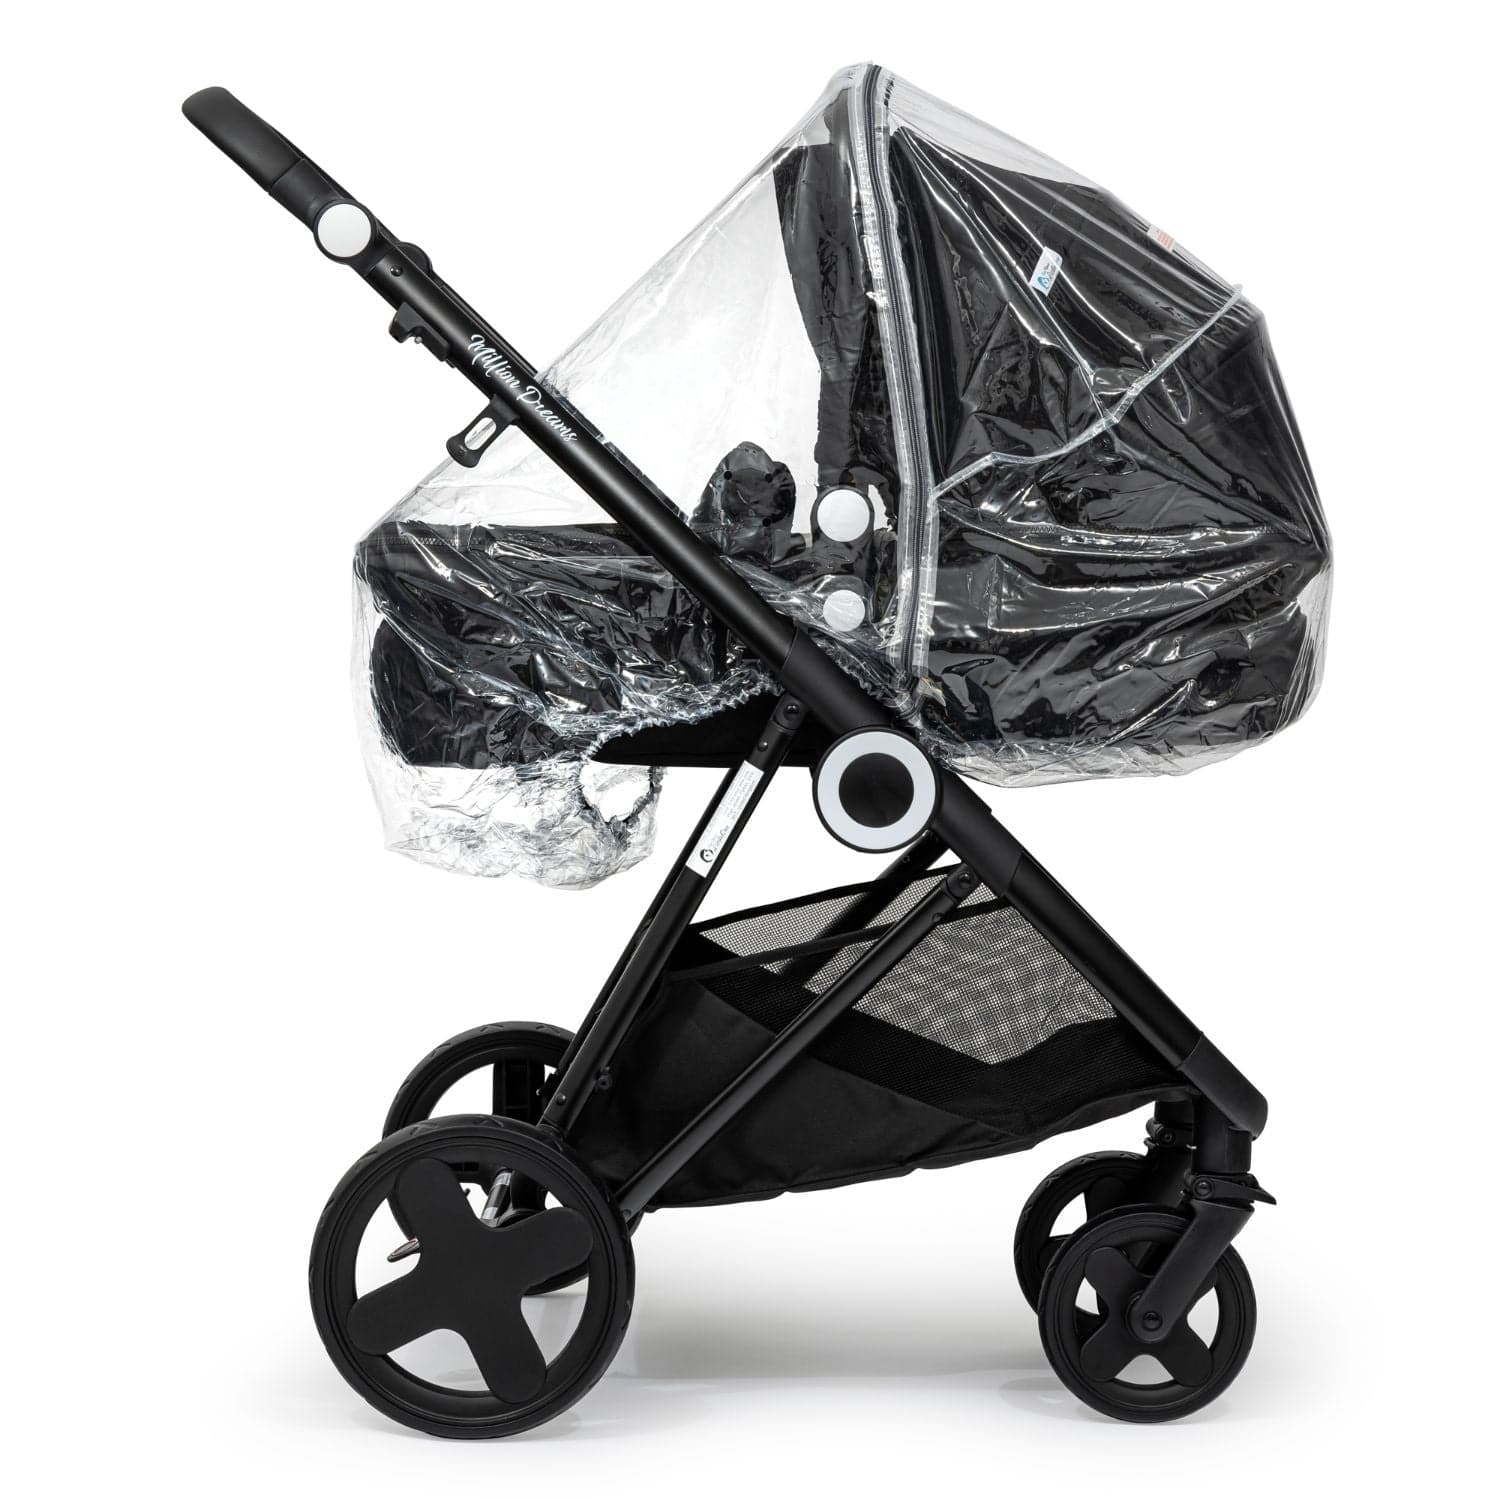 Carrycot Raincover Compatible With BabyCare - Fits All Models - For Your Little One